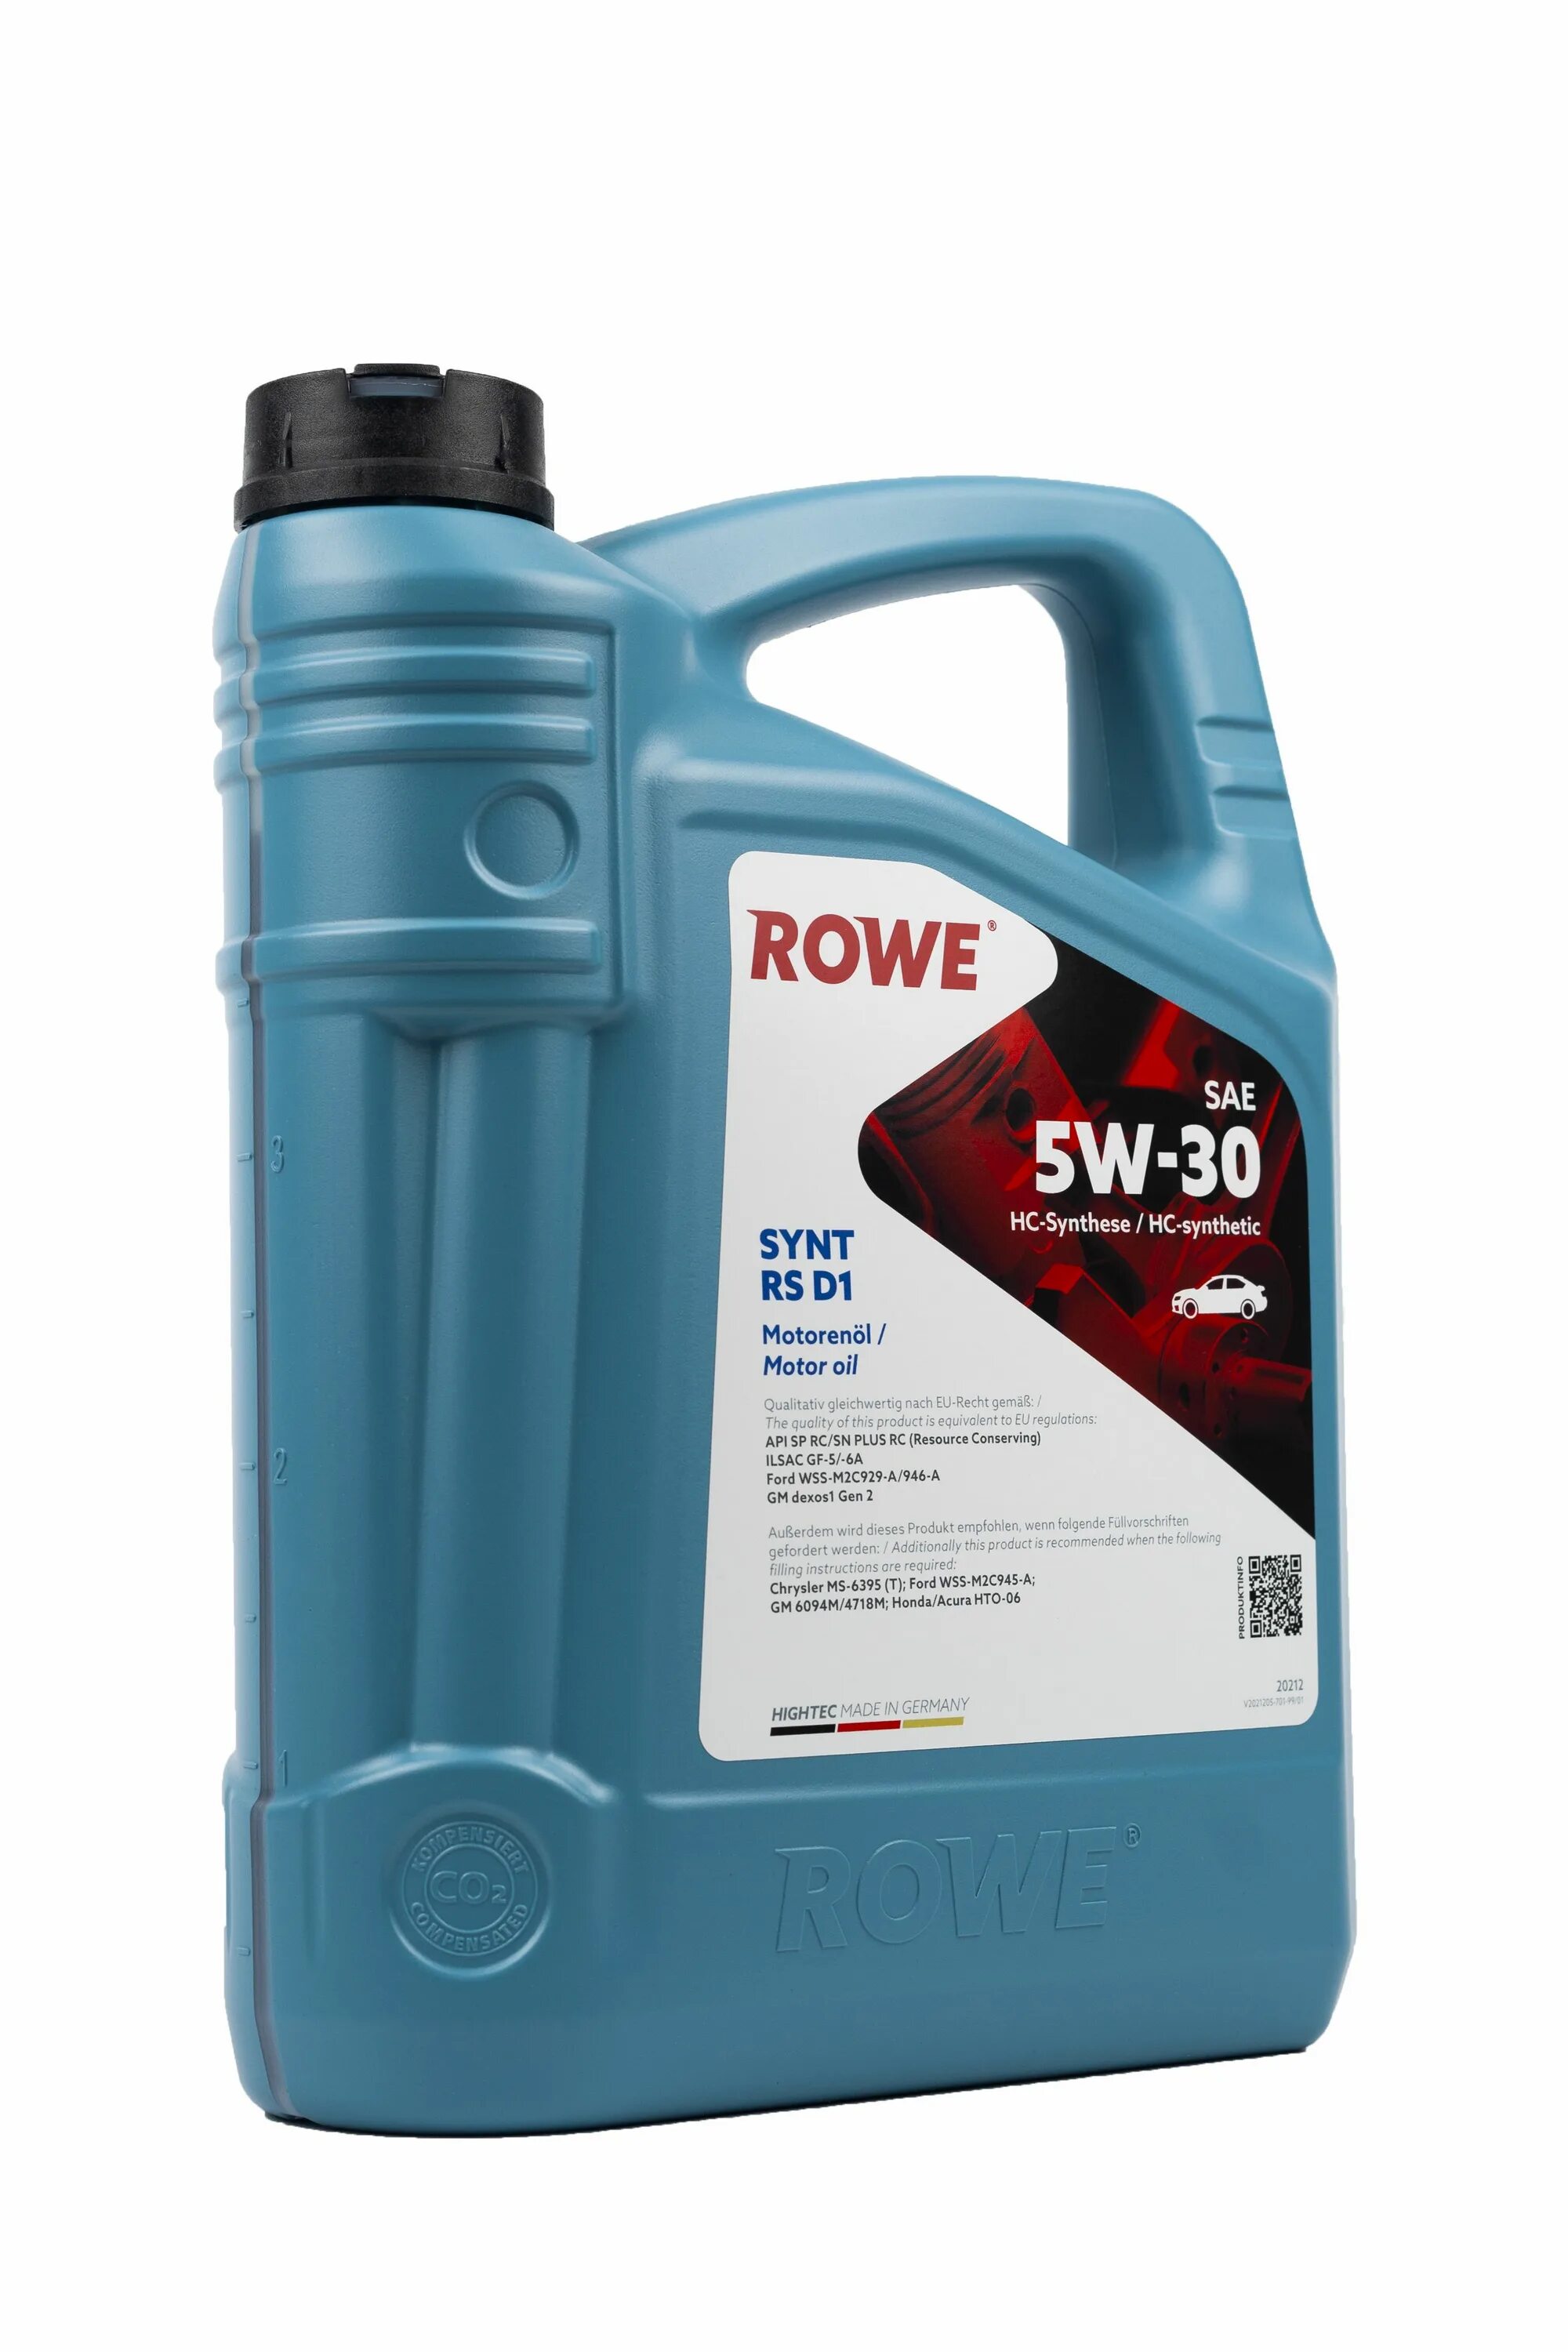 Rowe 5w30 Synt. Synt RS d1 5w-30 Rowe. Rowe 5w30 Ford. Hightec Synt RS d1 SAE 5w-30.